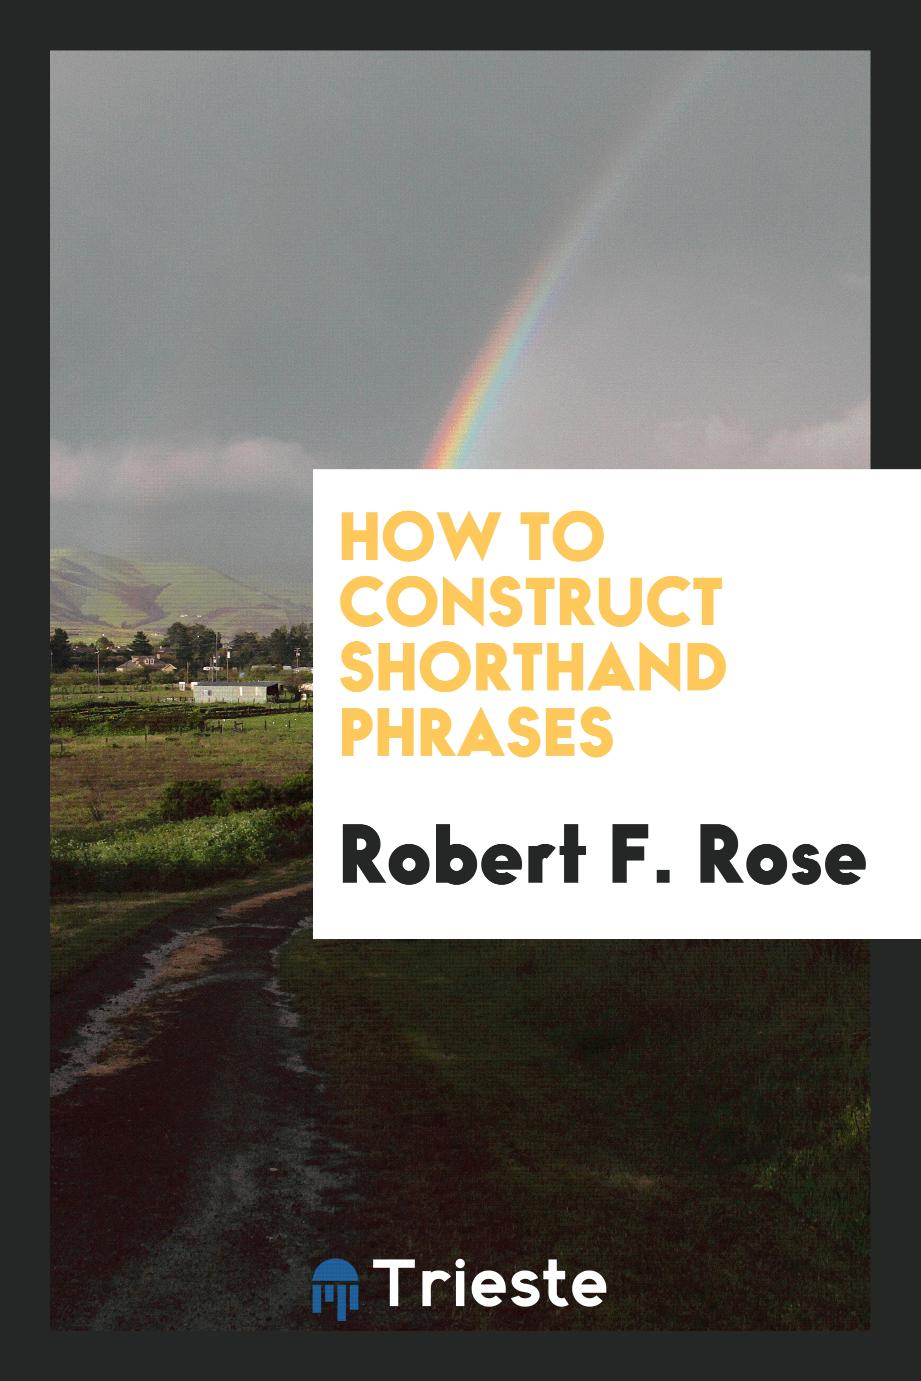 How to construct shorthand phrases